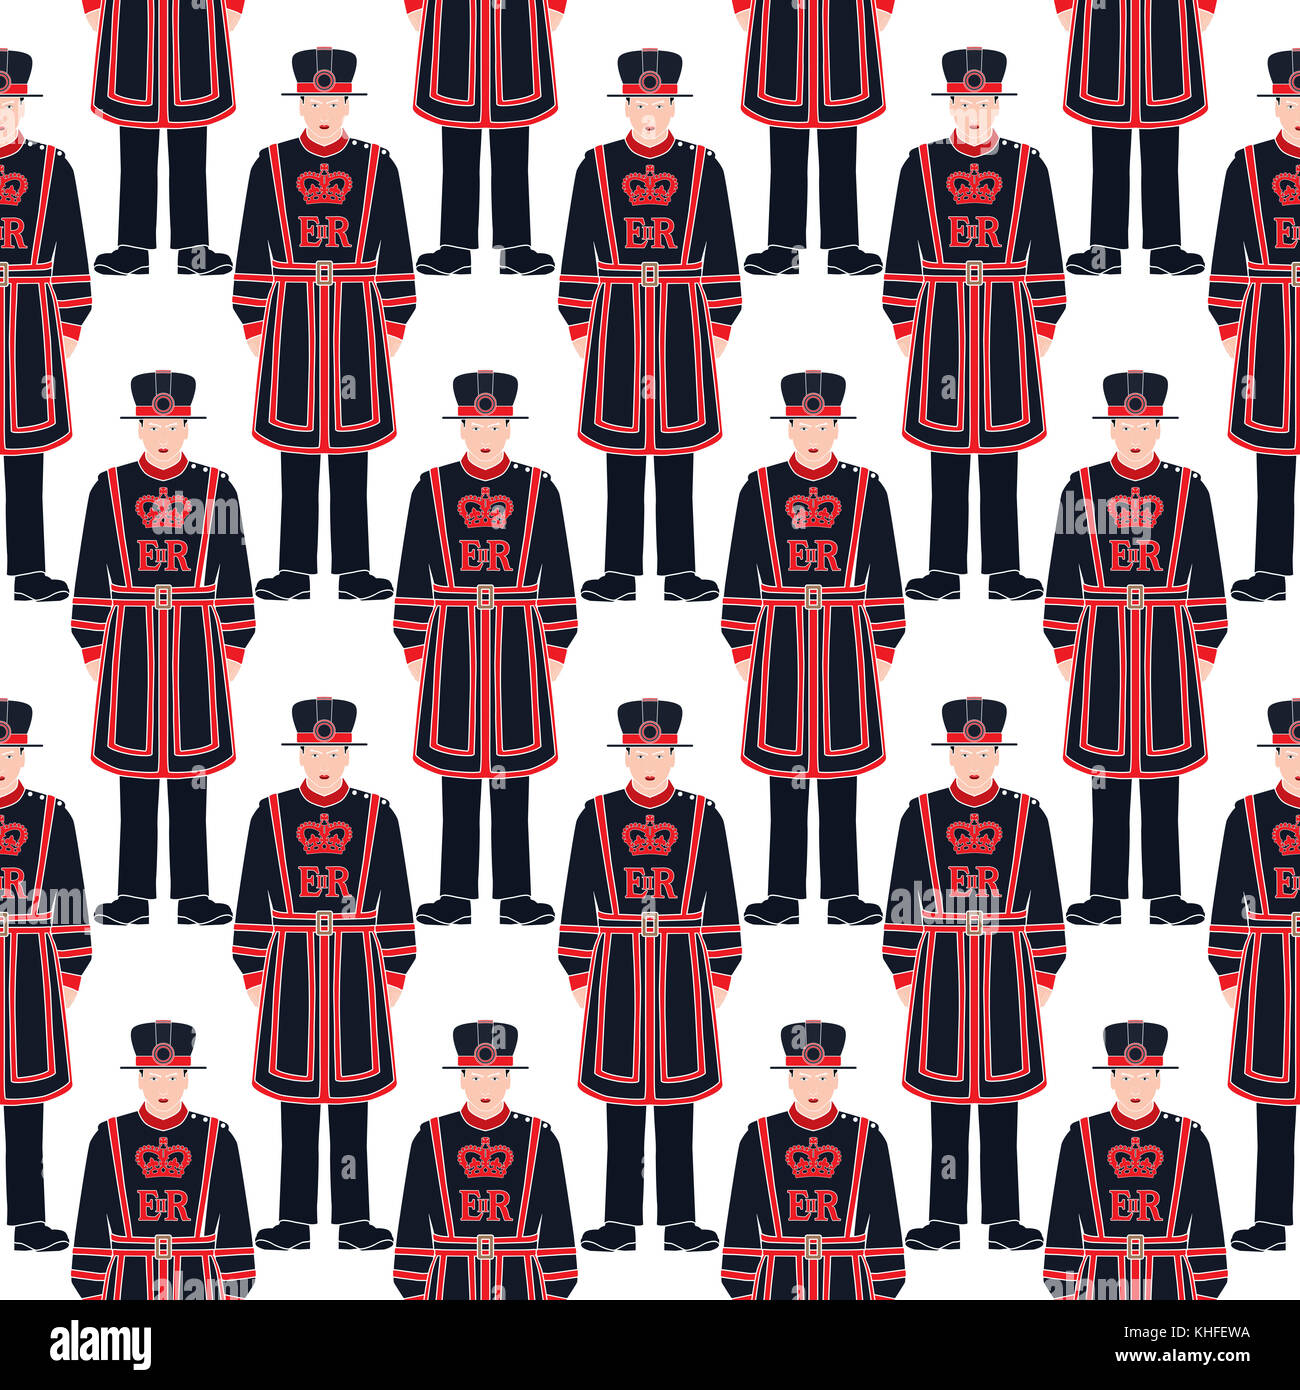 Beefeater soldier - Yeoman warder - London symbol - seamless vector pattern - silhouette - stencil - isolated detailed illustration Stock Photo